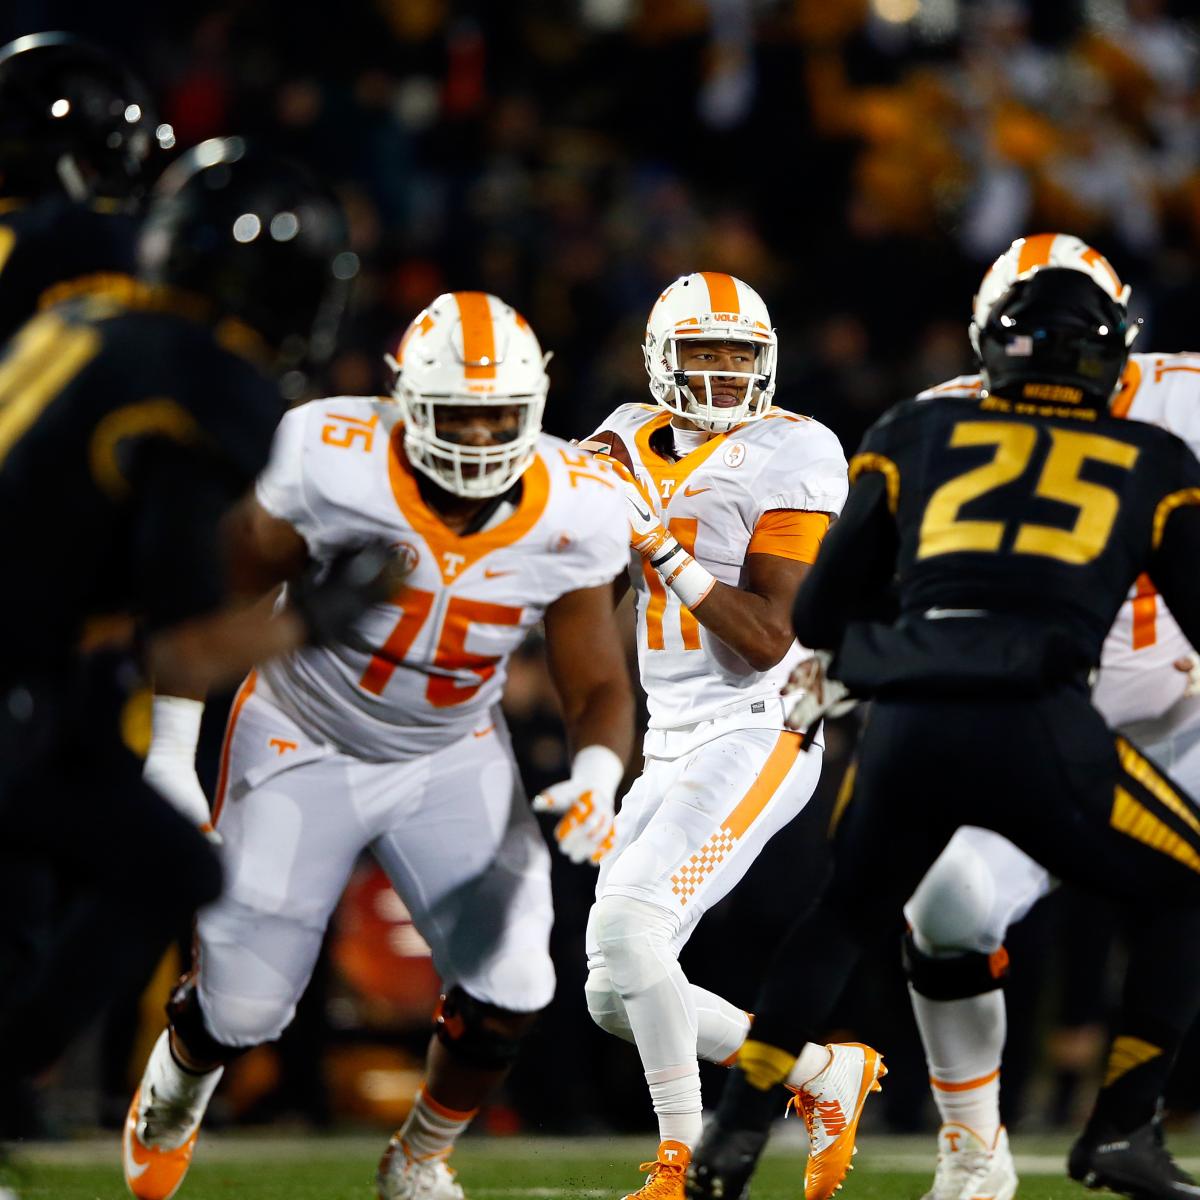 Missouri vs. Tennessee Game Preview, Prediction and Players to Watch